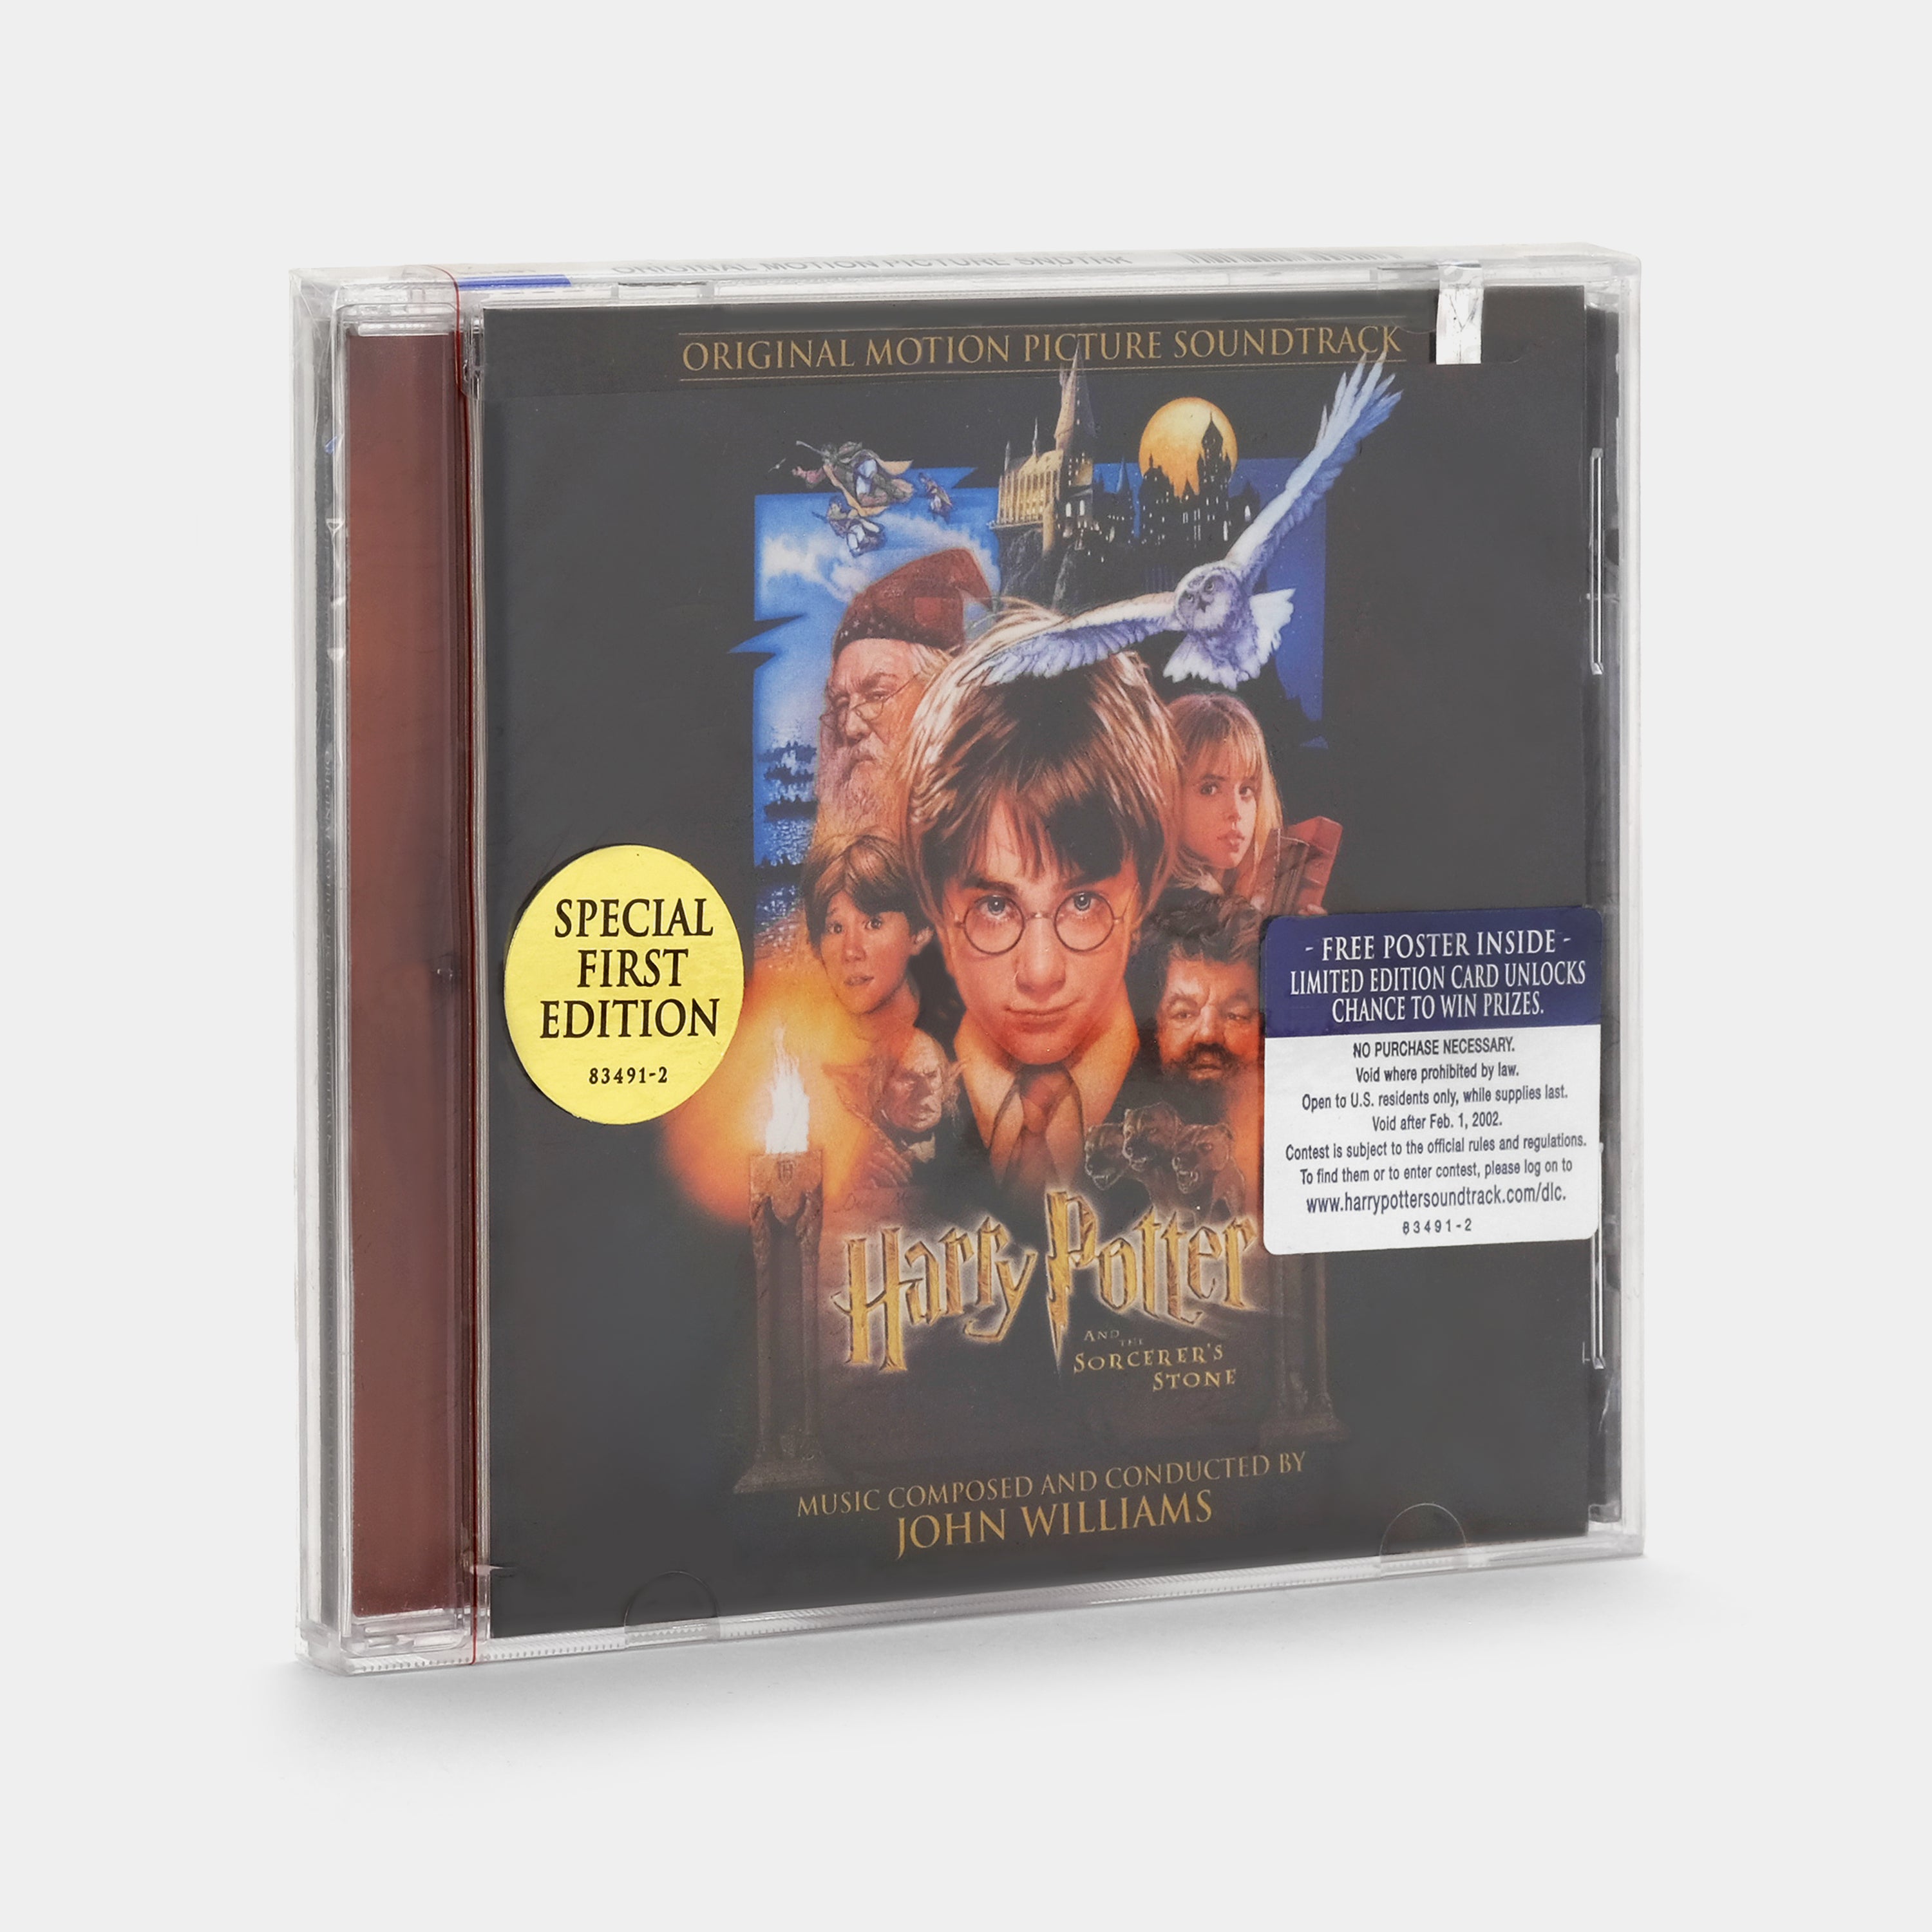 John Williams - Harry Potter And The Sorcerer's Stone (Original Motion Picture Soundtrack) CD (Sealed)